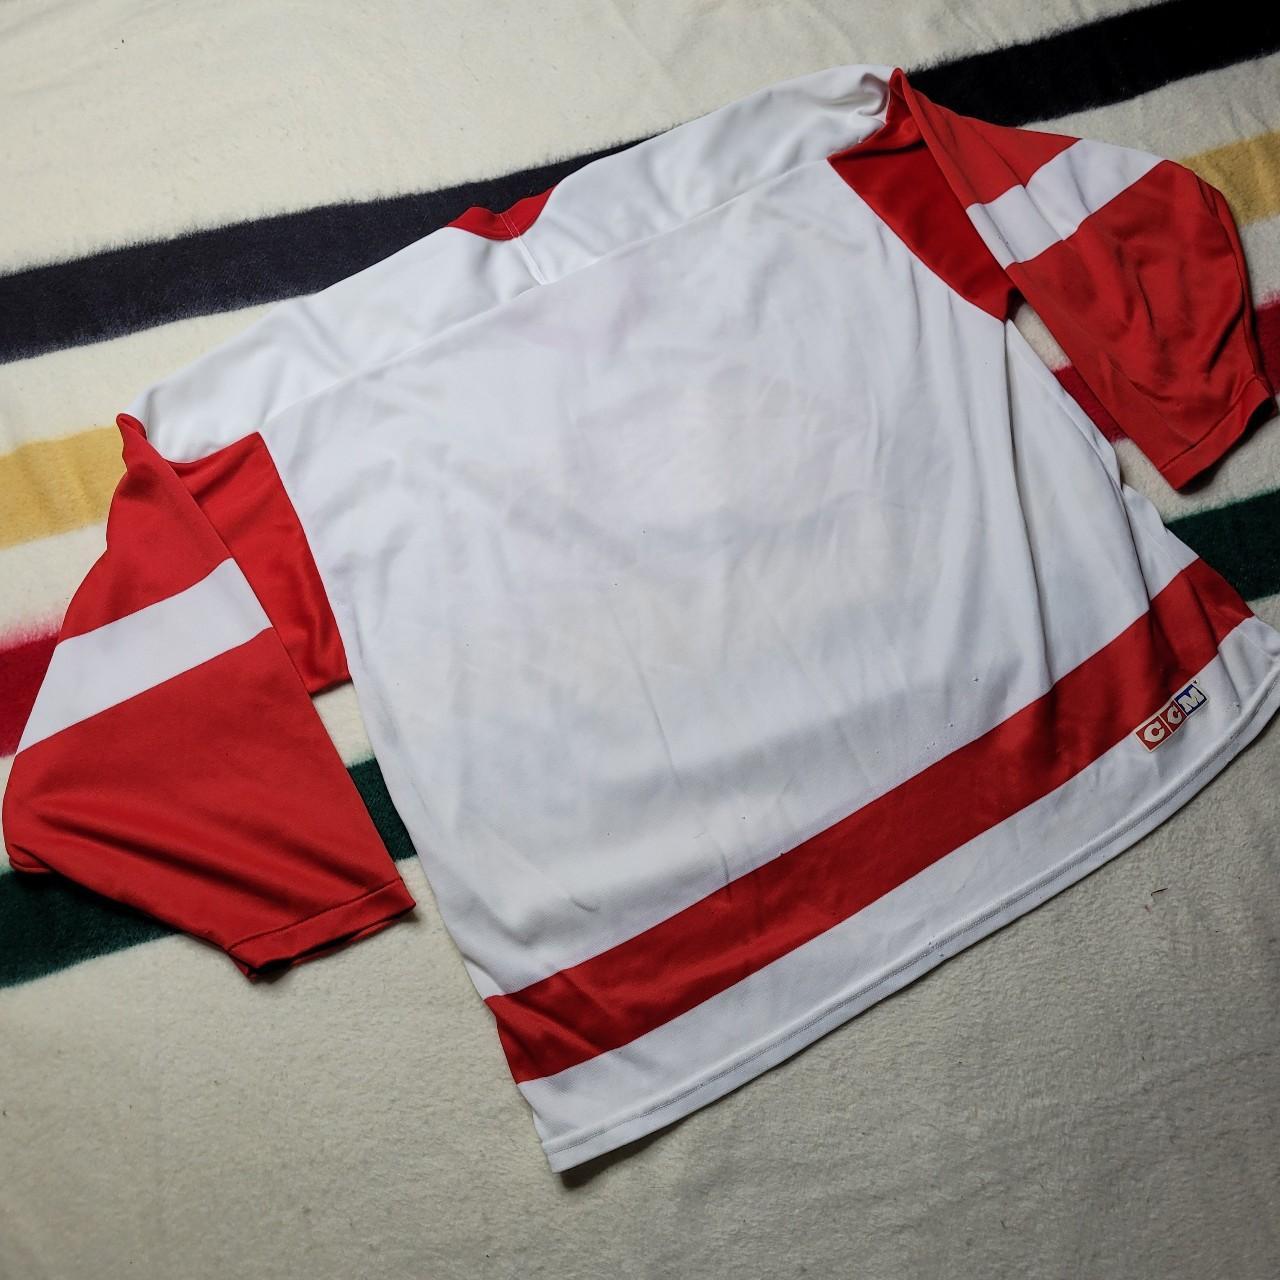 Men's White and Red T-shirt (4)